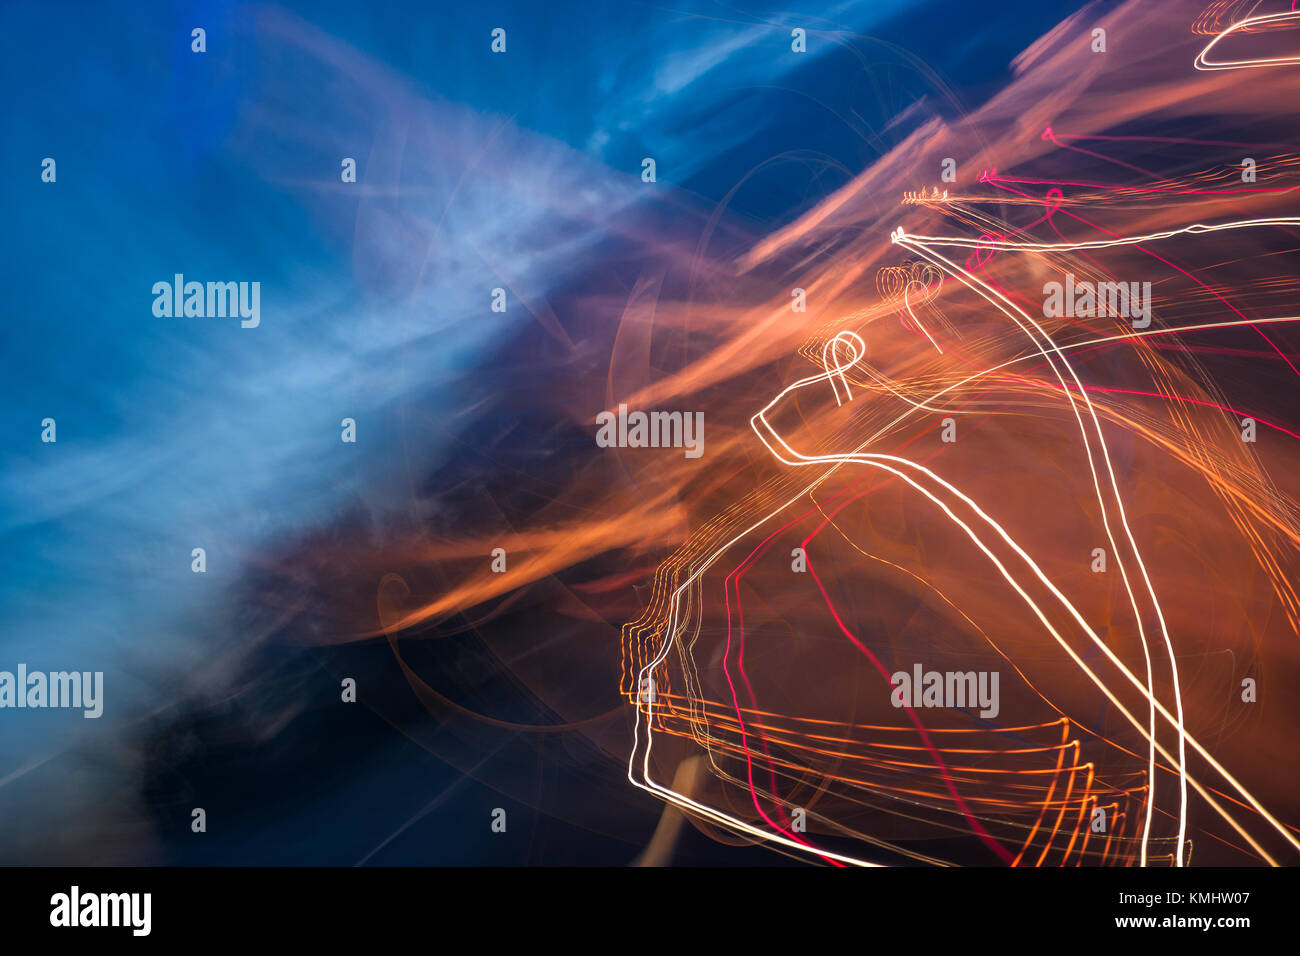 slow motion abstraction on the road. blurred background of car light traces and cloudy night sky. traffic wild energy concept Stock Photo